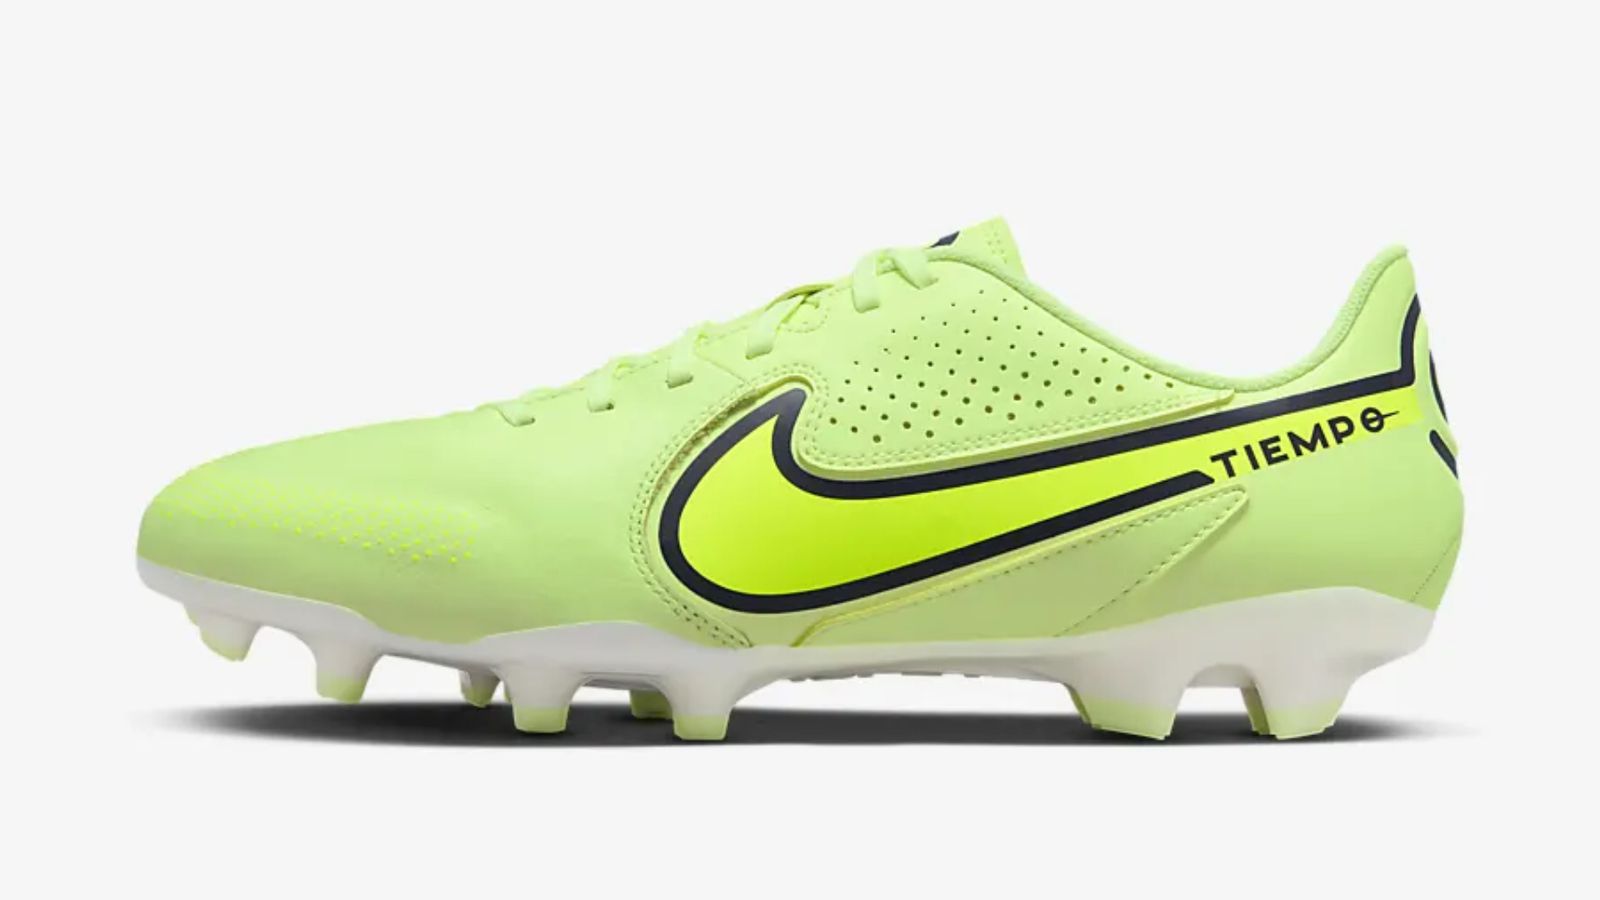 Nike Tiempo Legend 9 Academy product image of a light volt yellow and white boot with brighter yellow Nike branding.